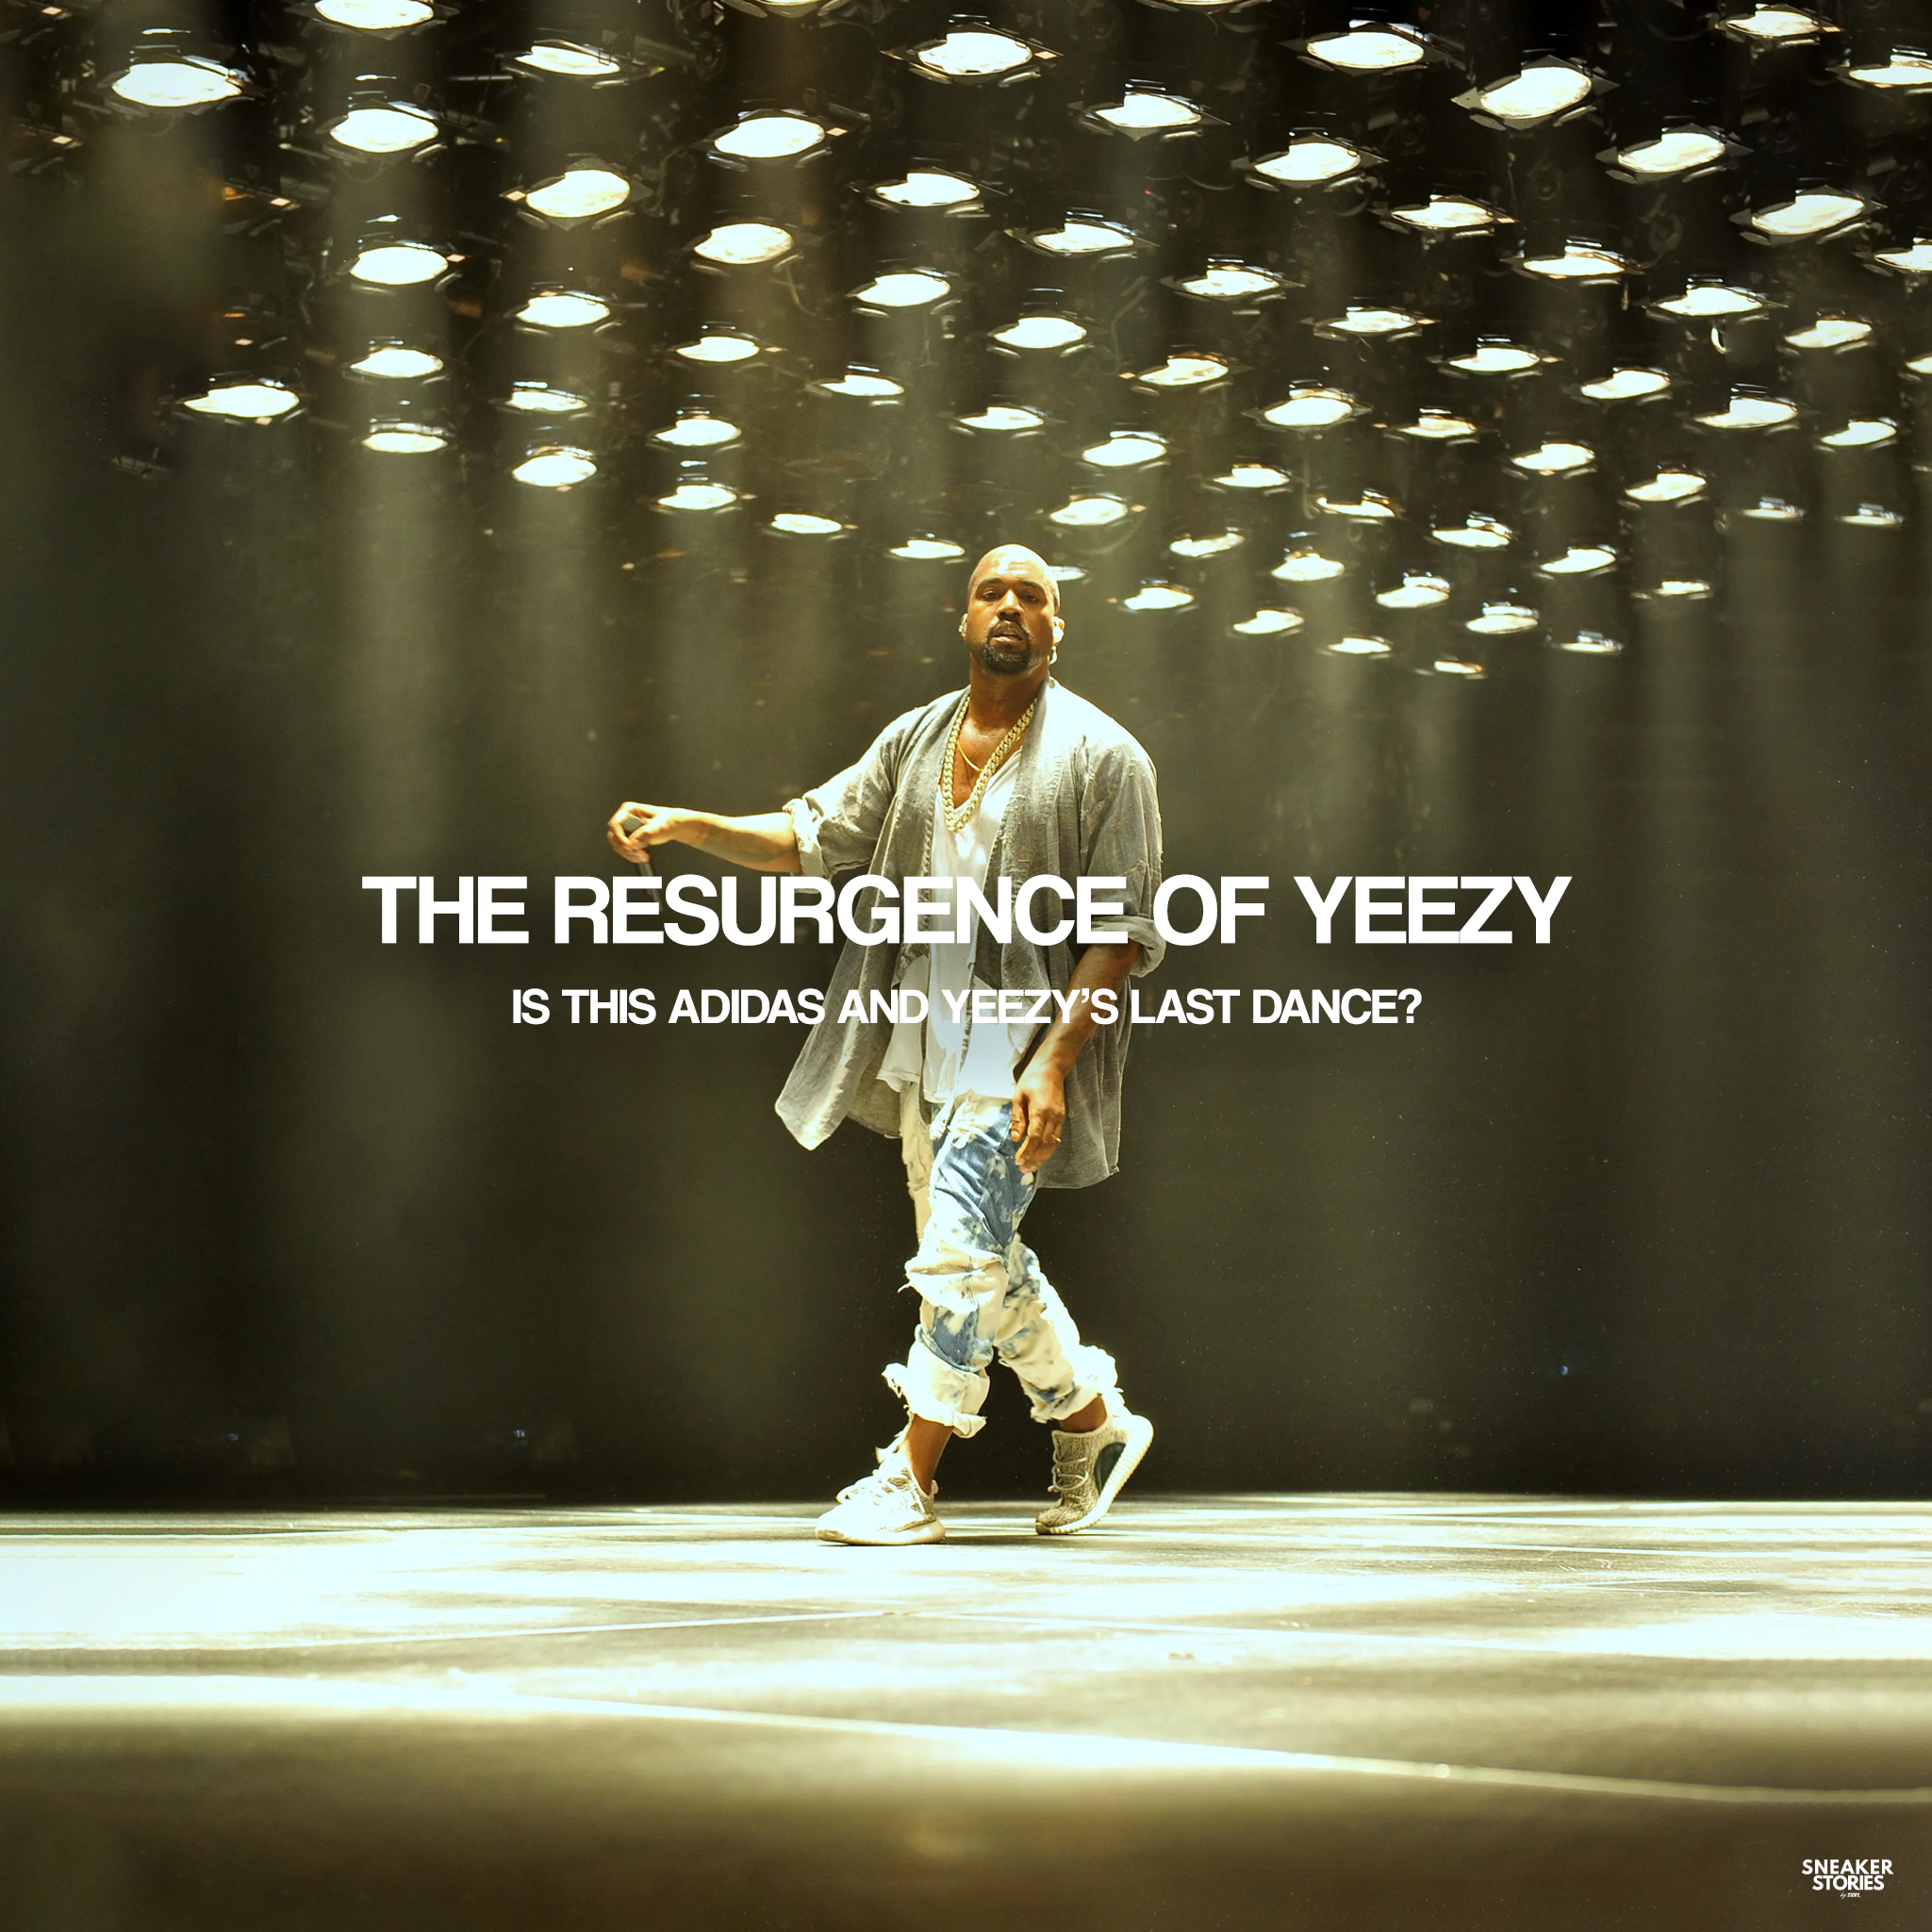 The resurgence of Yeezy: Is this Adidas and Yeezy's last dance?